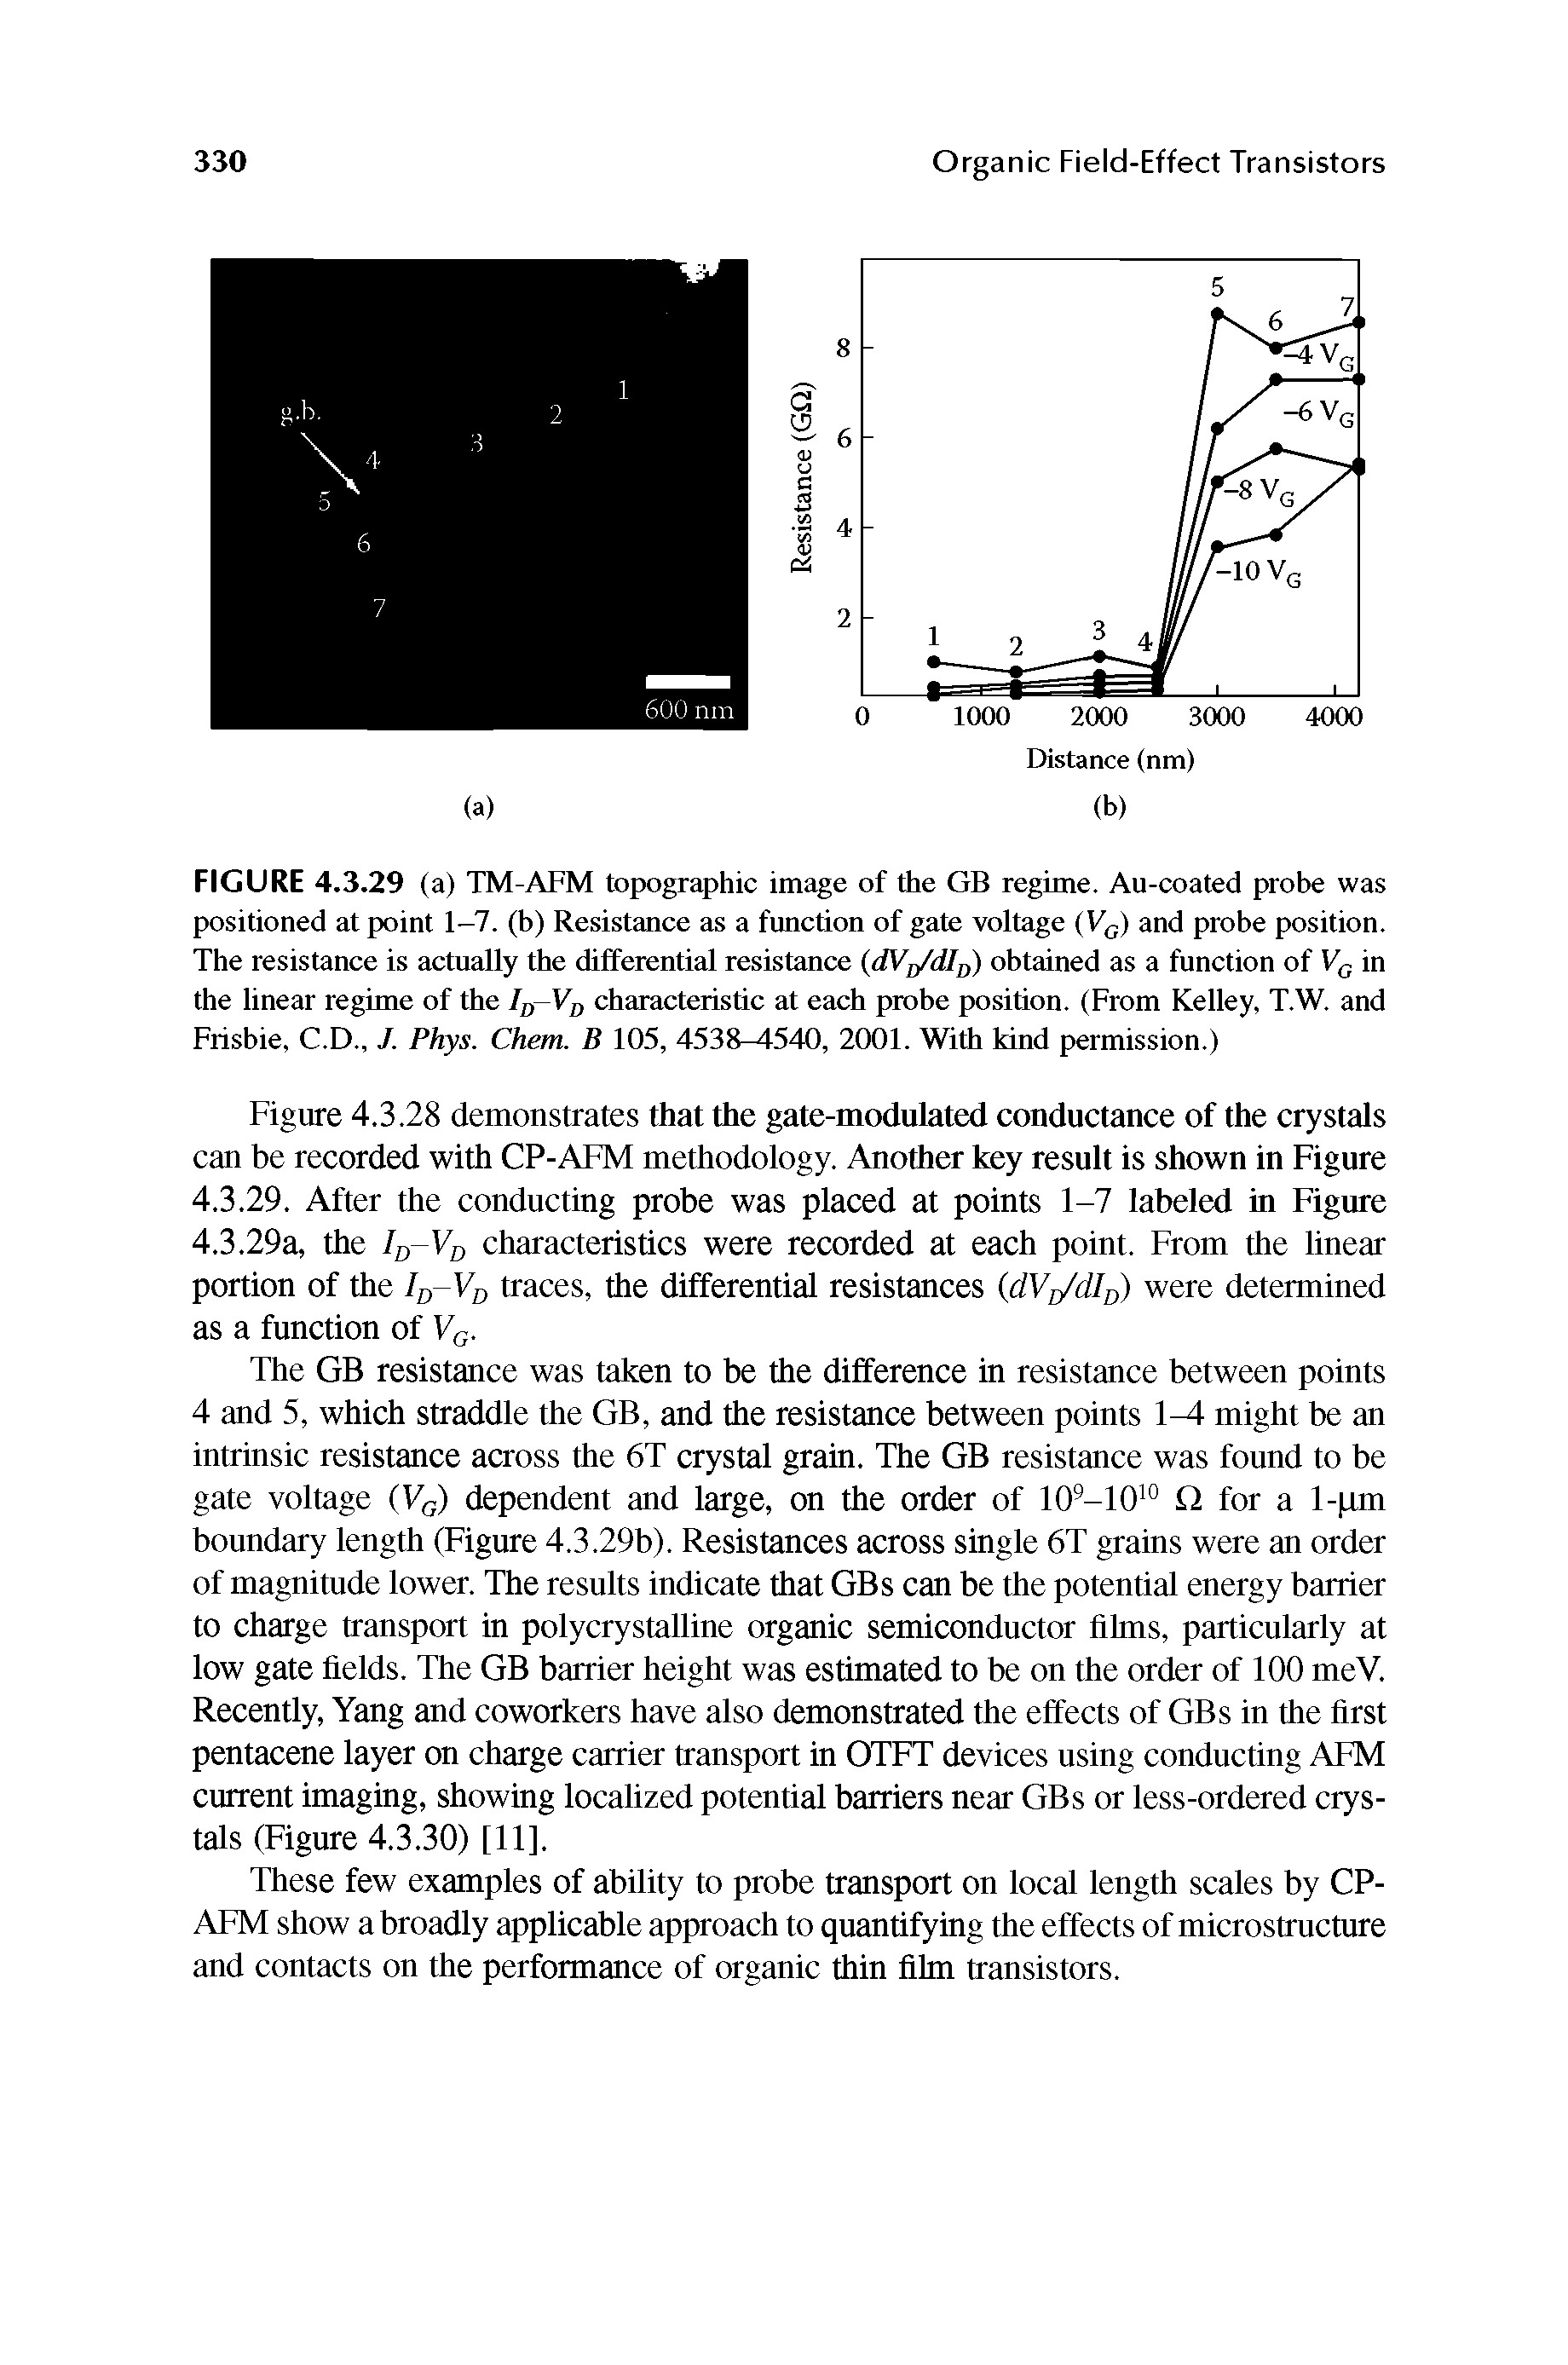 Figure 4.3.28 demonstrates that the gate-modulated conductance of the crystals can be recorded with CP-AFM methodology. Another key result is shown in Figure 4.3.29. After the conducting probe was placed at points 1-7 labeled in Figure 4.3.29a, the /o-Vo characteristics were recorded at each point. From the linear portion of the /o-Vo traces, the differential resistances dVjy/dlj ) were determined as a function of Vq.